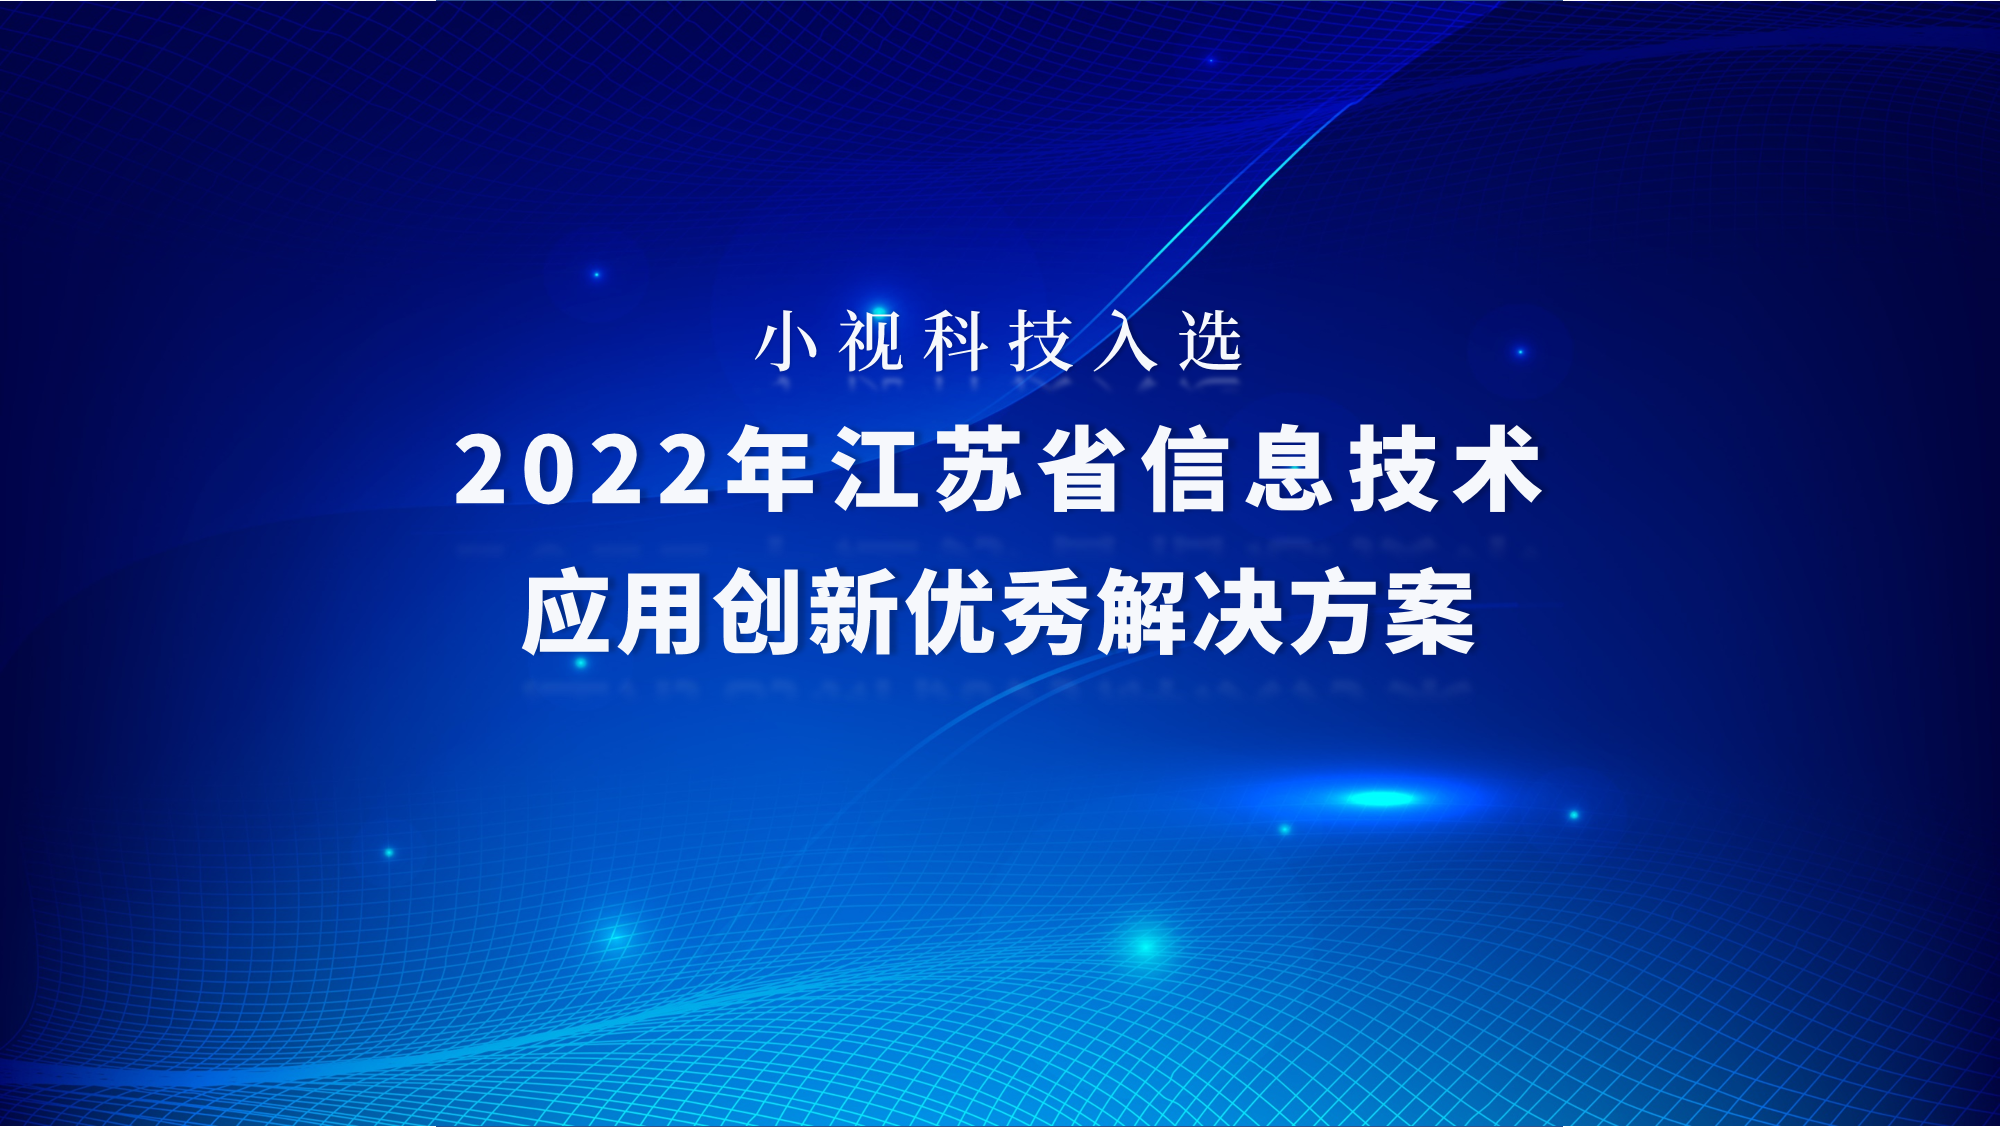 Minivision Technology Solution Selected as an Excellent Solution for Information Technology Application Innovation in Jiangsu Province in 2022